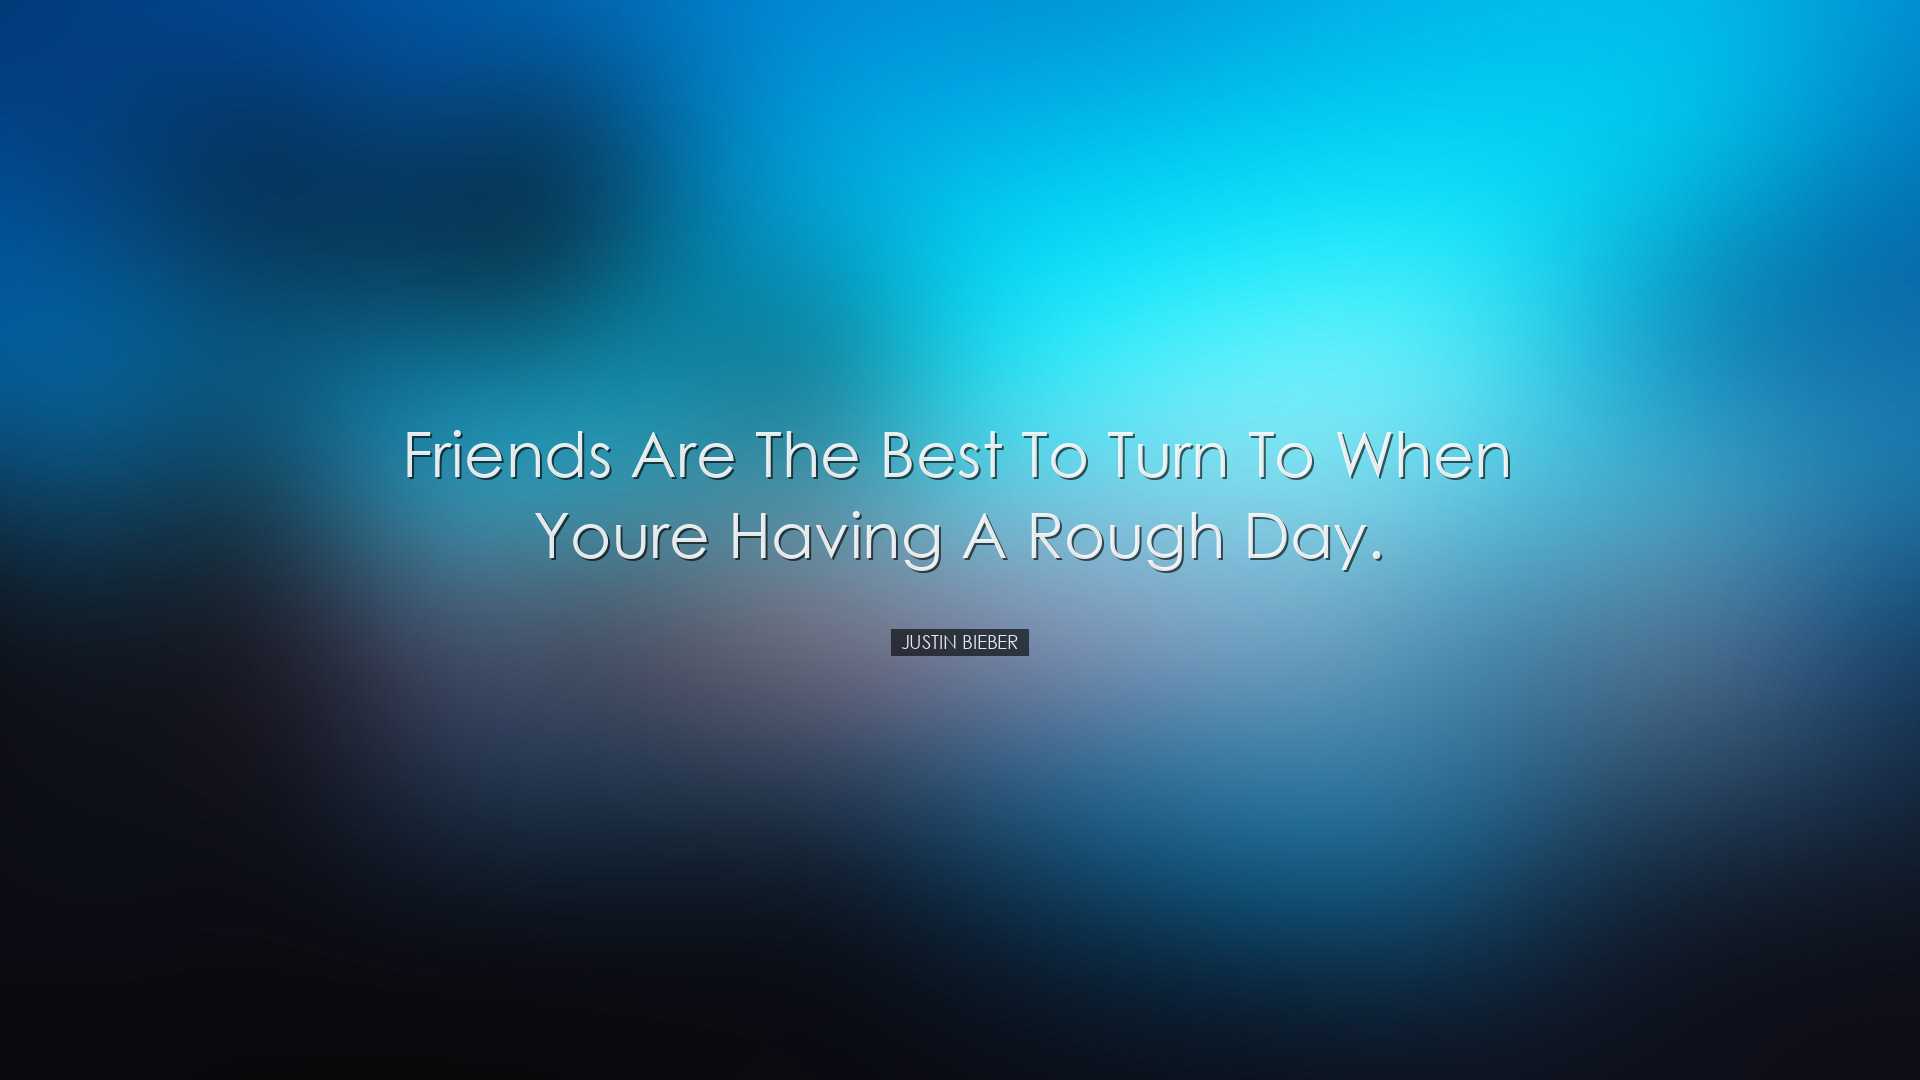 Friends are the best to turn to when youre having a rough day. - J